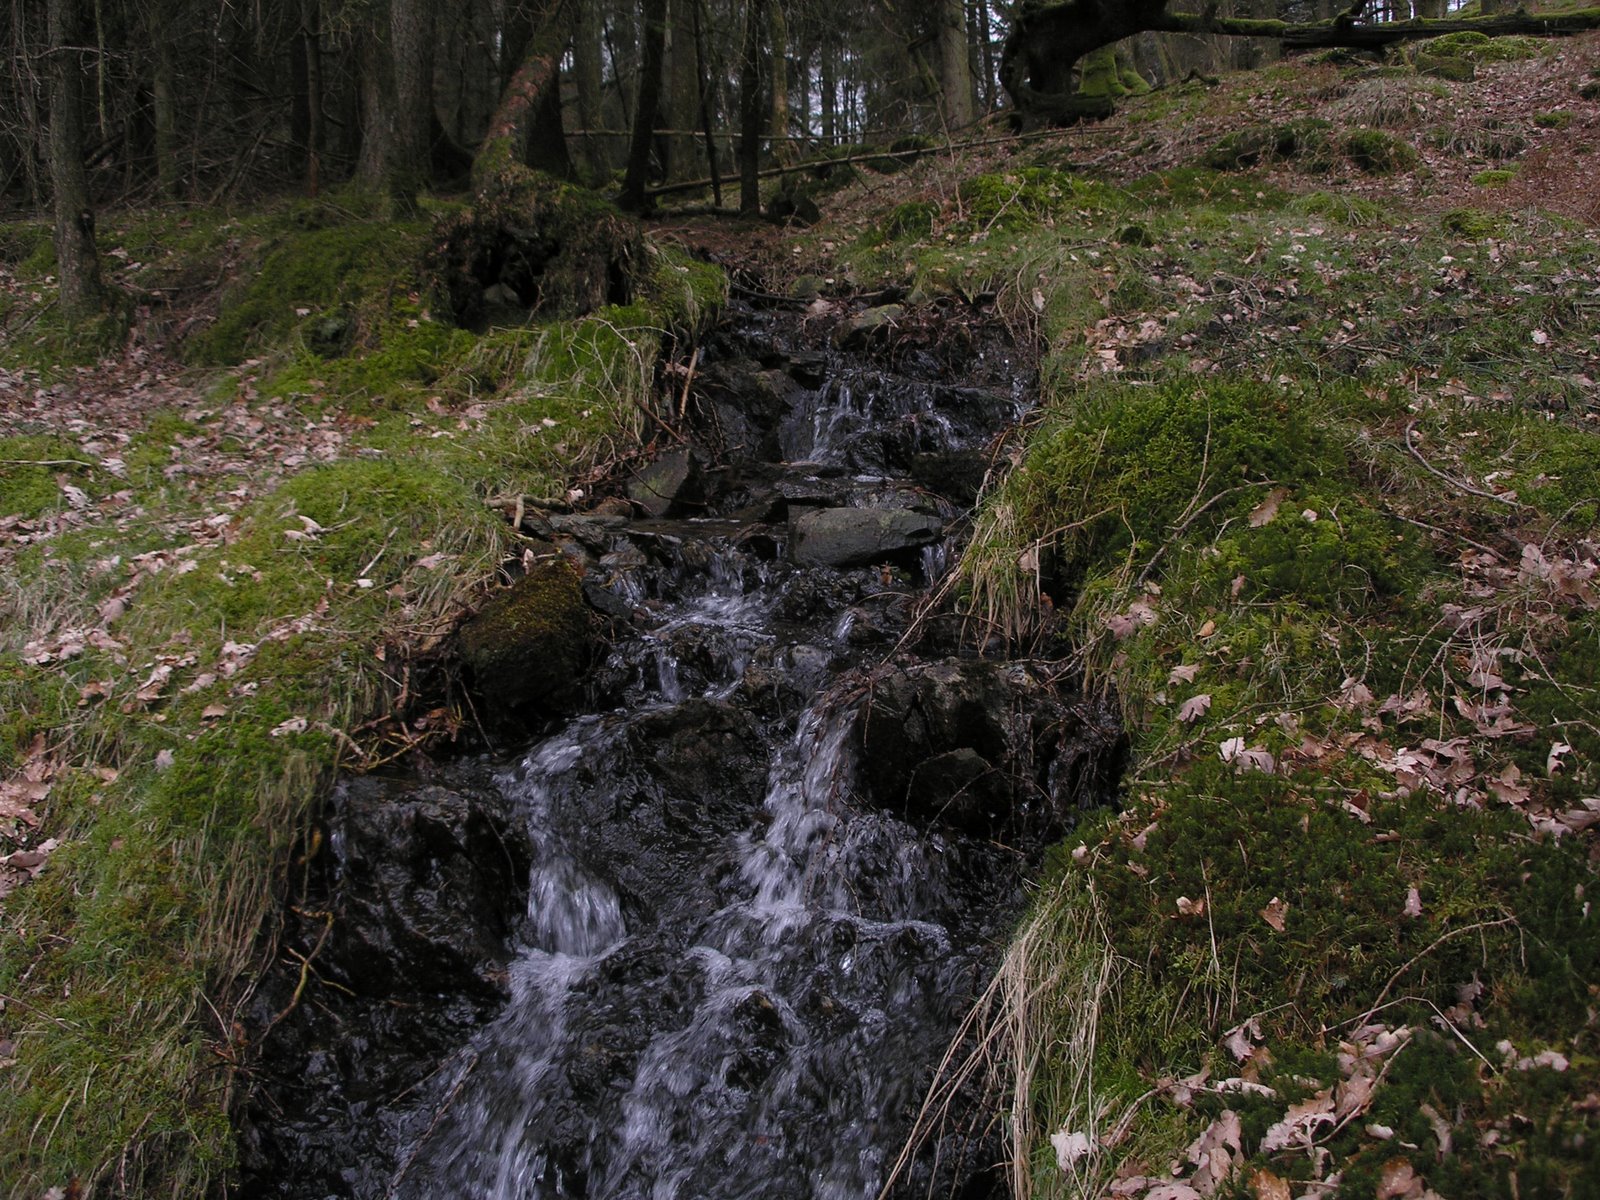 [Lake+District+070+--+Creek+in+mossy+forest.jpg]